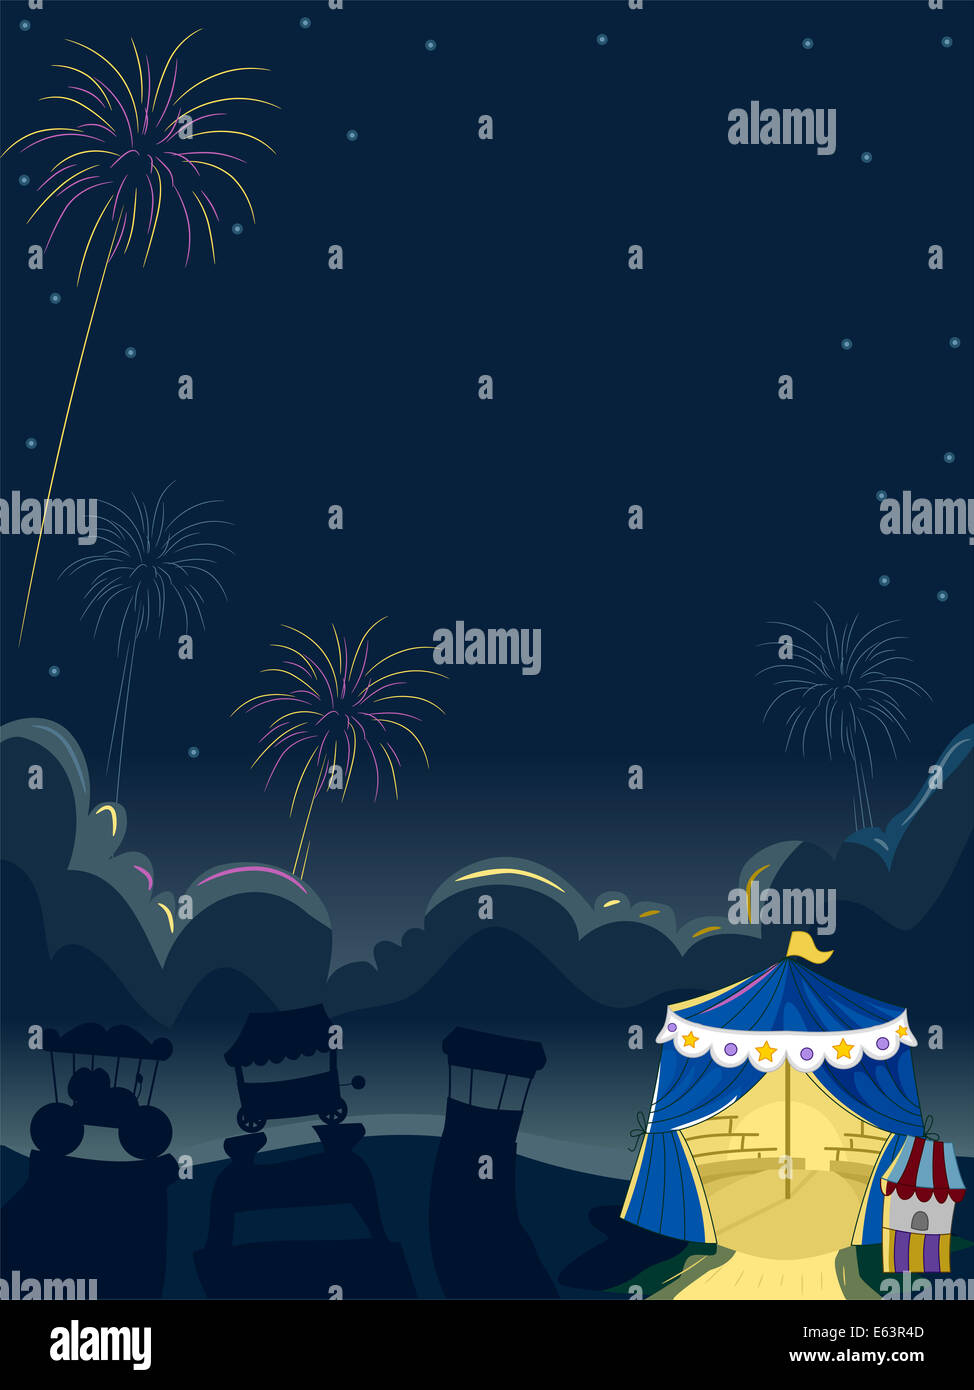 Illustration of a Fireworks Display with Circus Tents in the Background Stock Photo